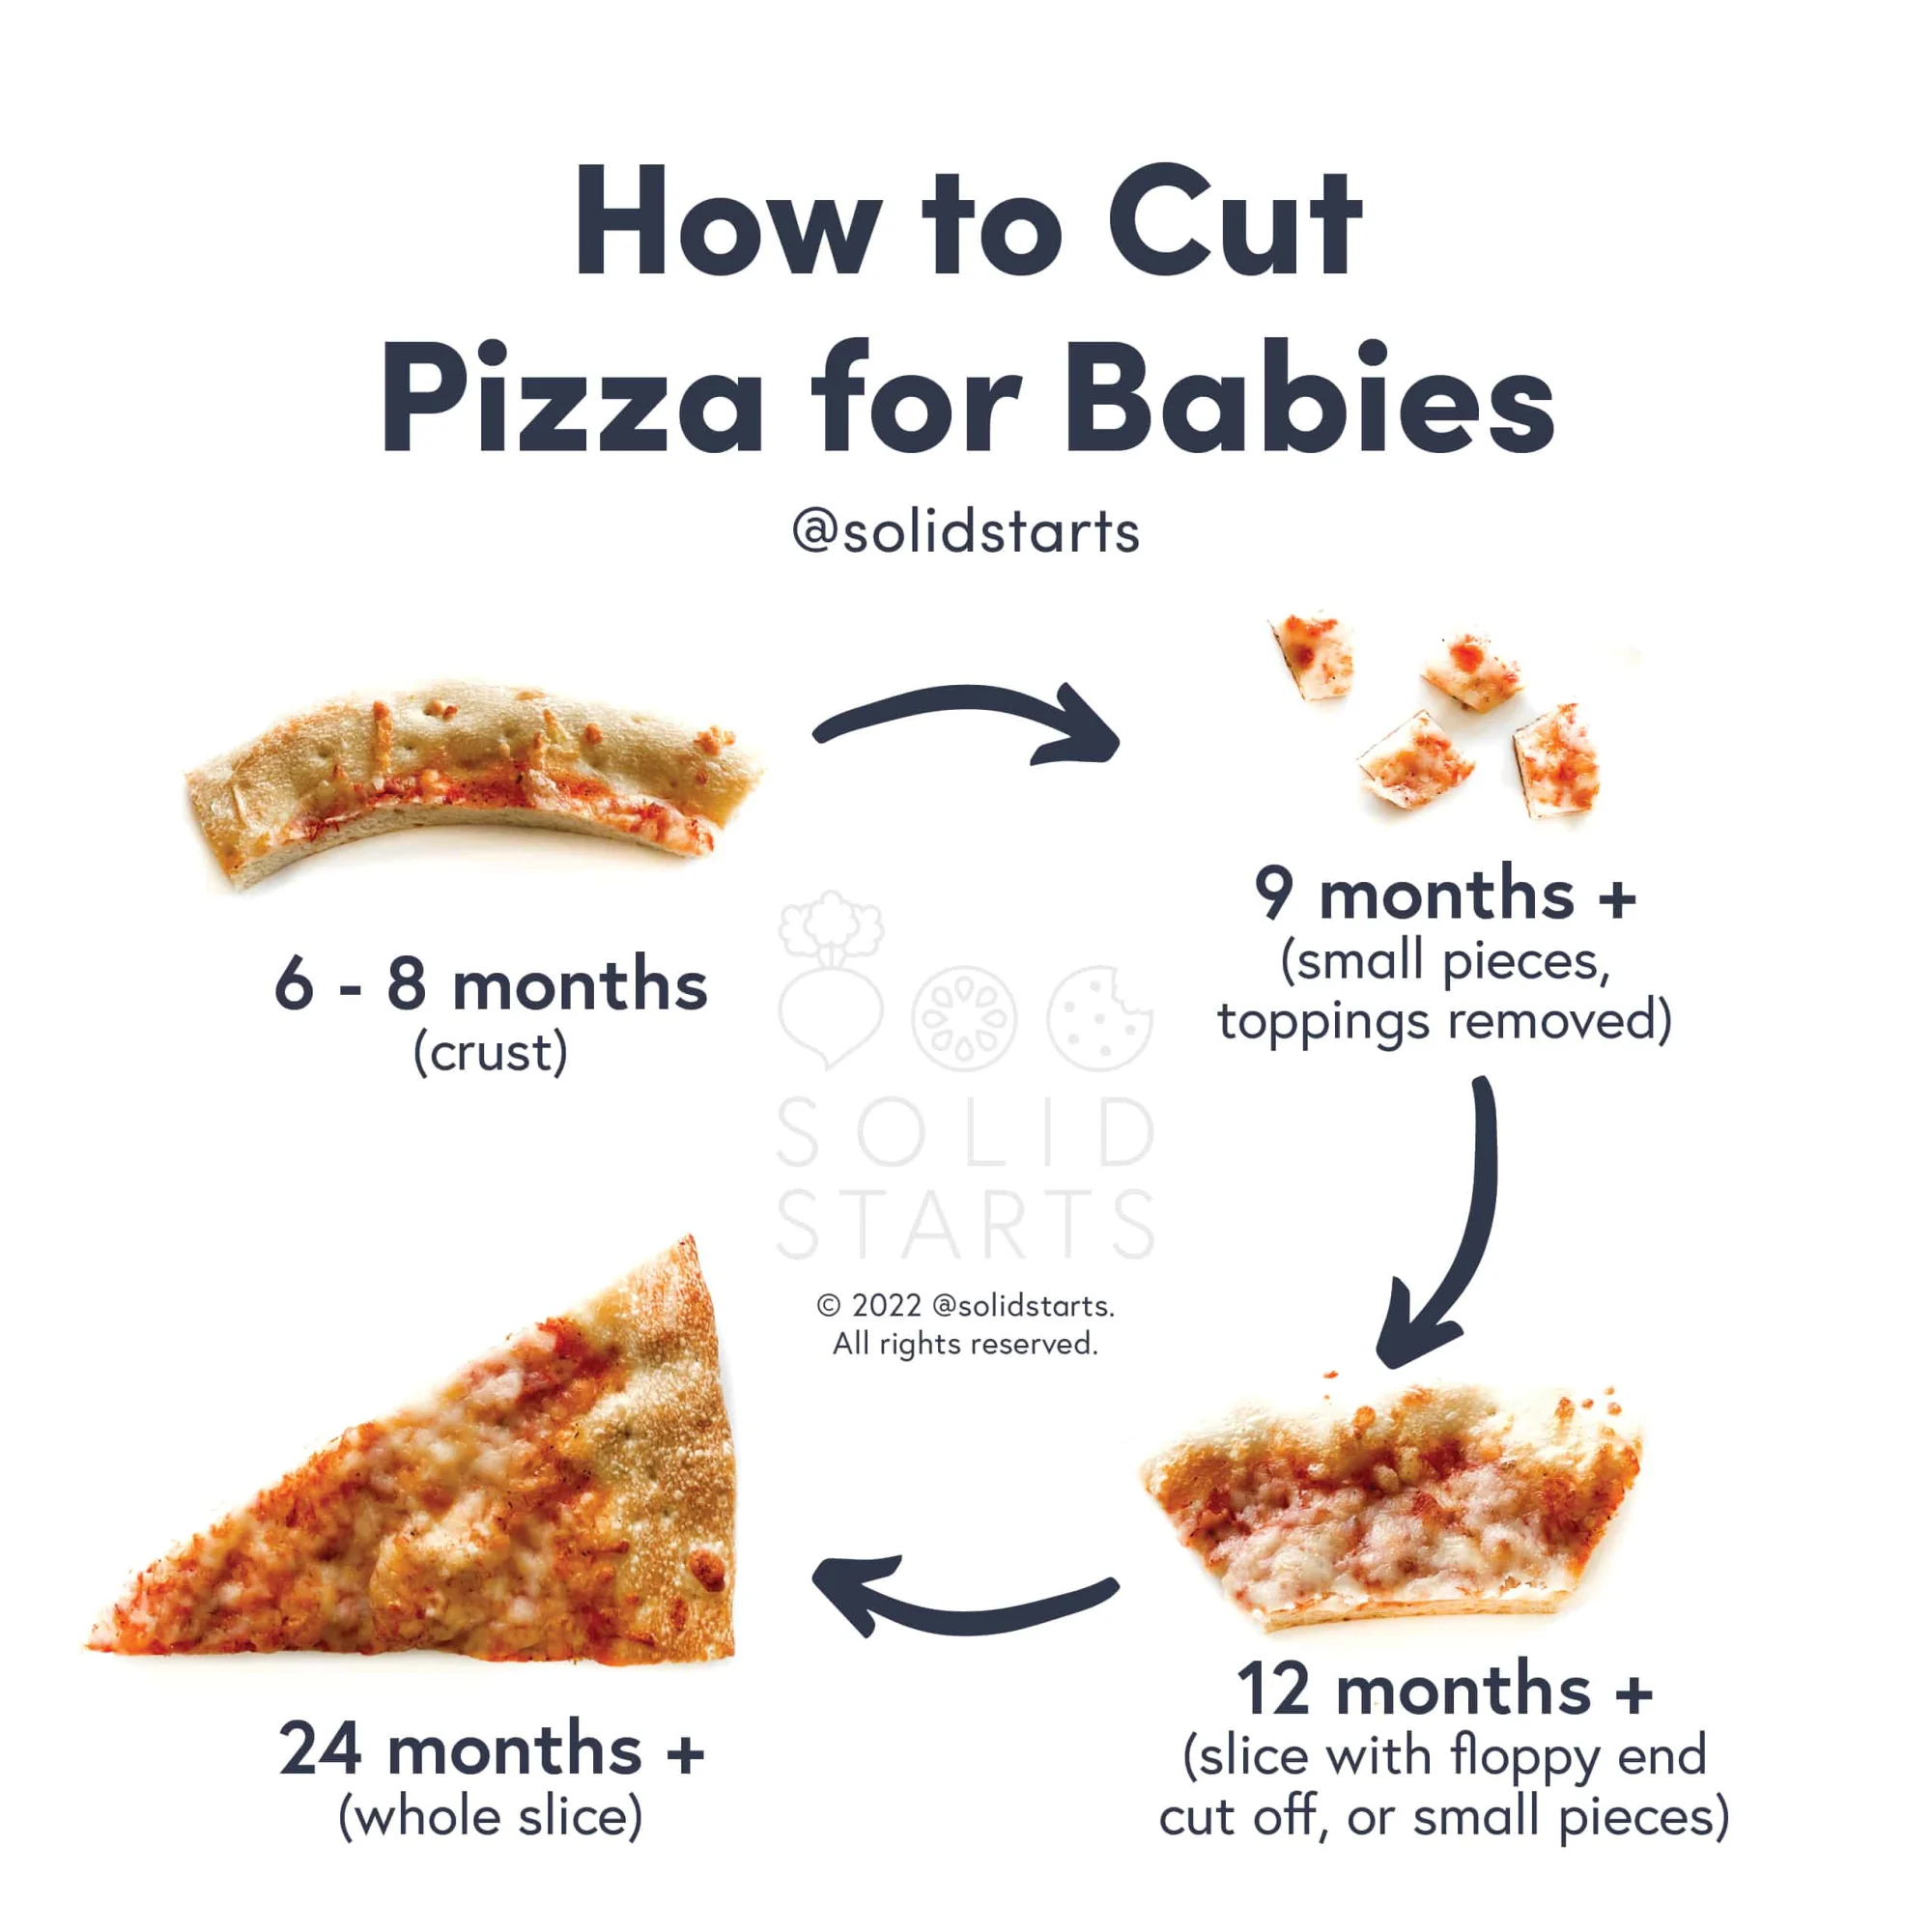 How to Cut Pizza for Babies v1